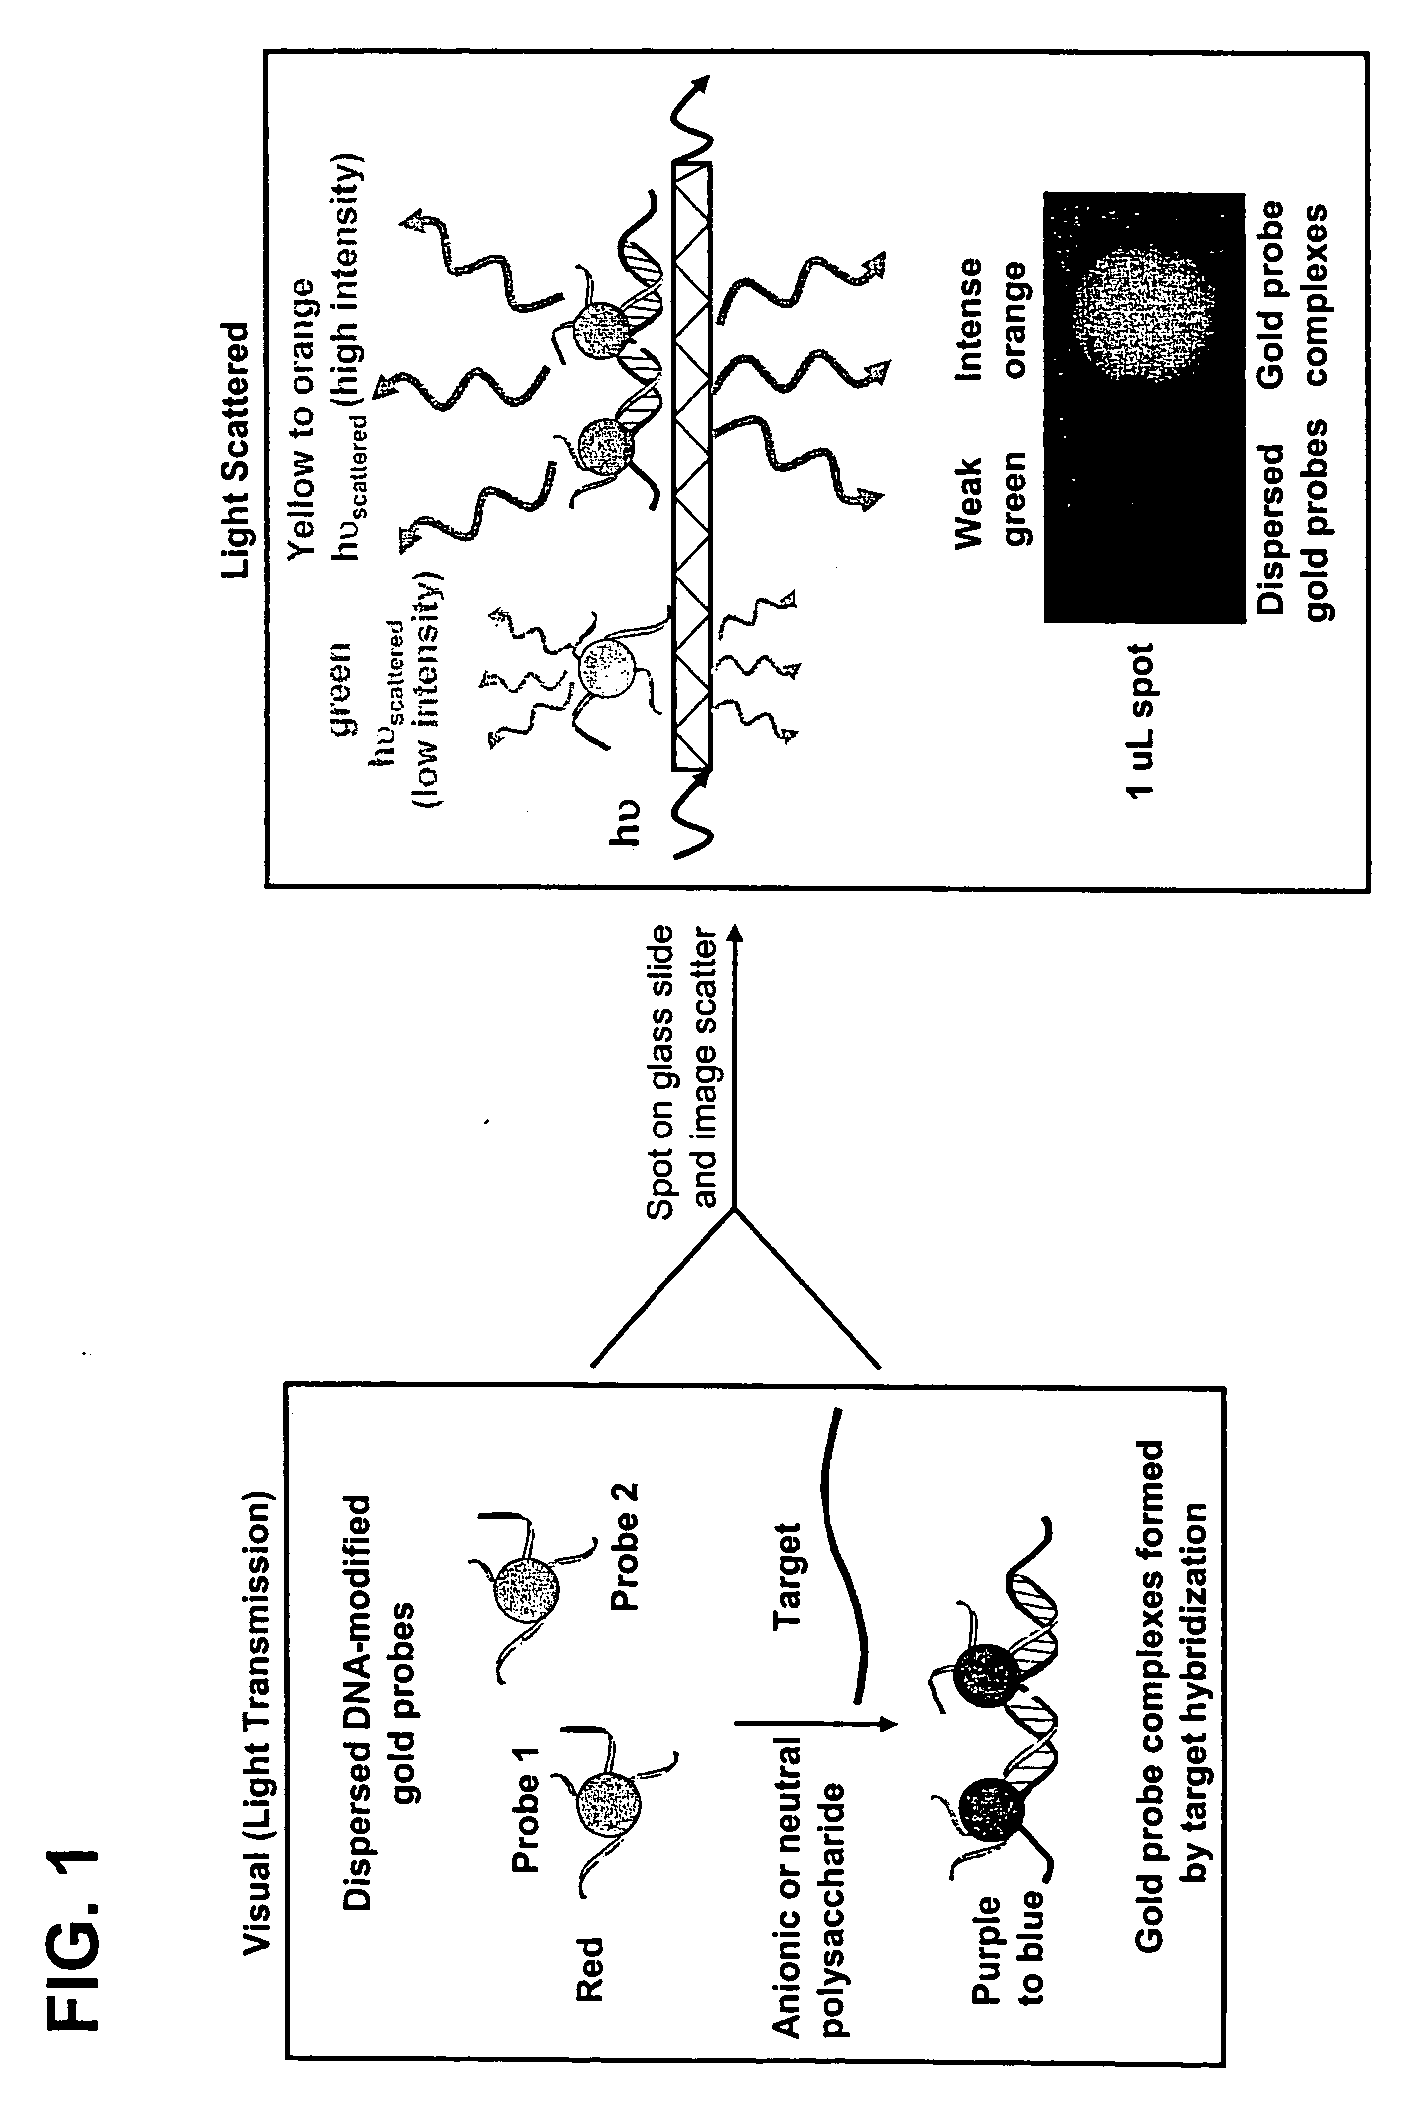 Method for detecting analytes based on evanescent illumination and scatter-based detection of nanoparticle probe complexes